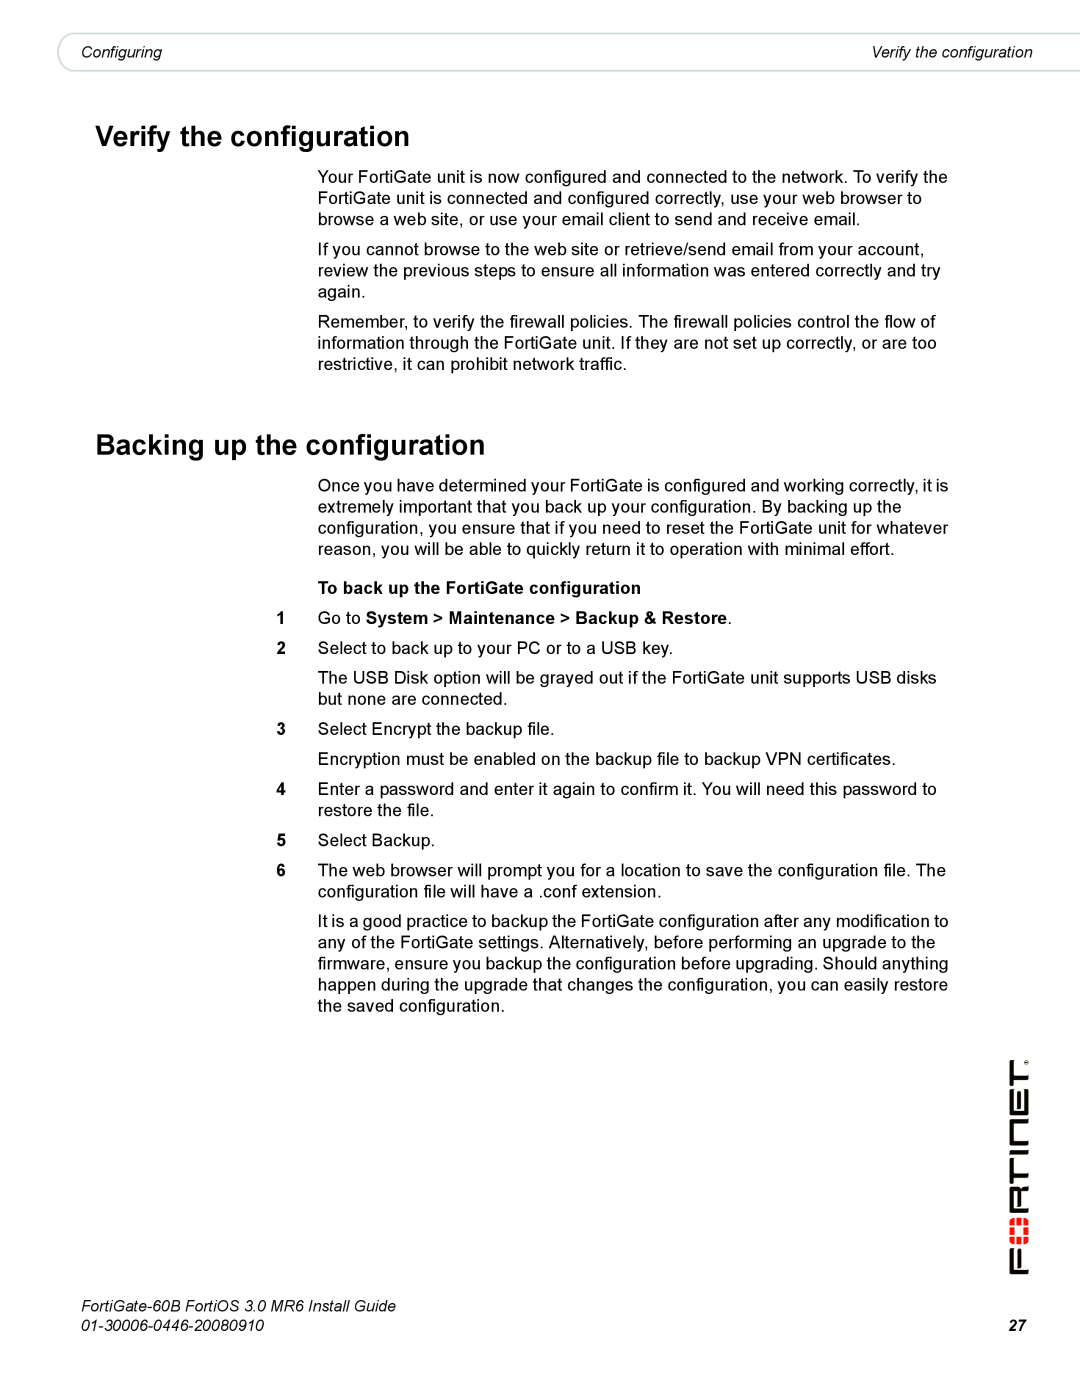 Fortinet 60B manual Verify the configuration, Backing up the configuration, To back up the FortiGate configuration 